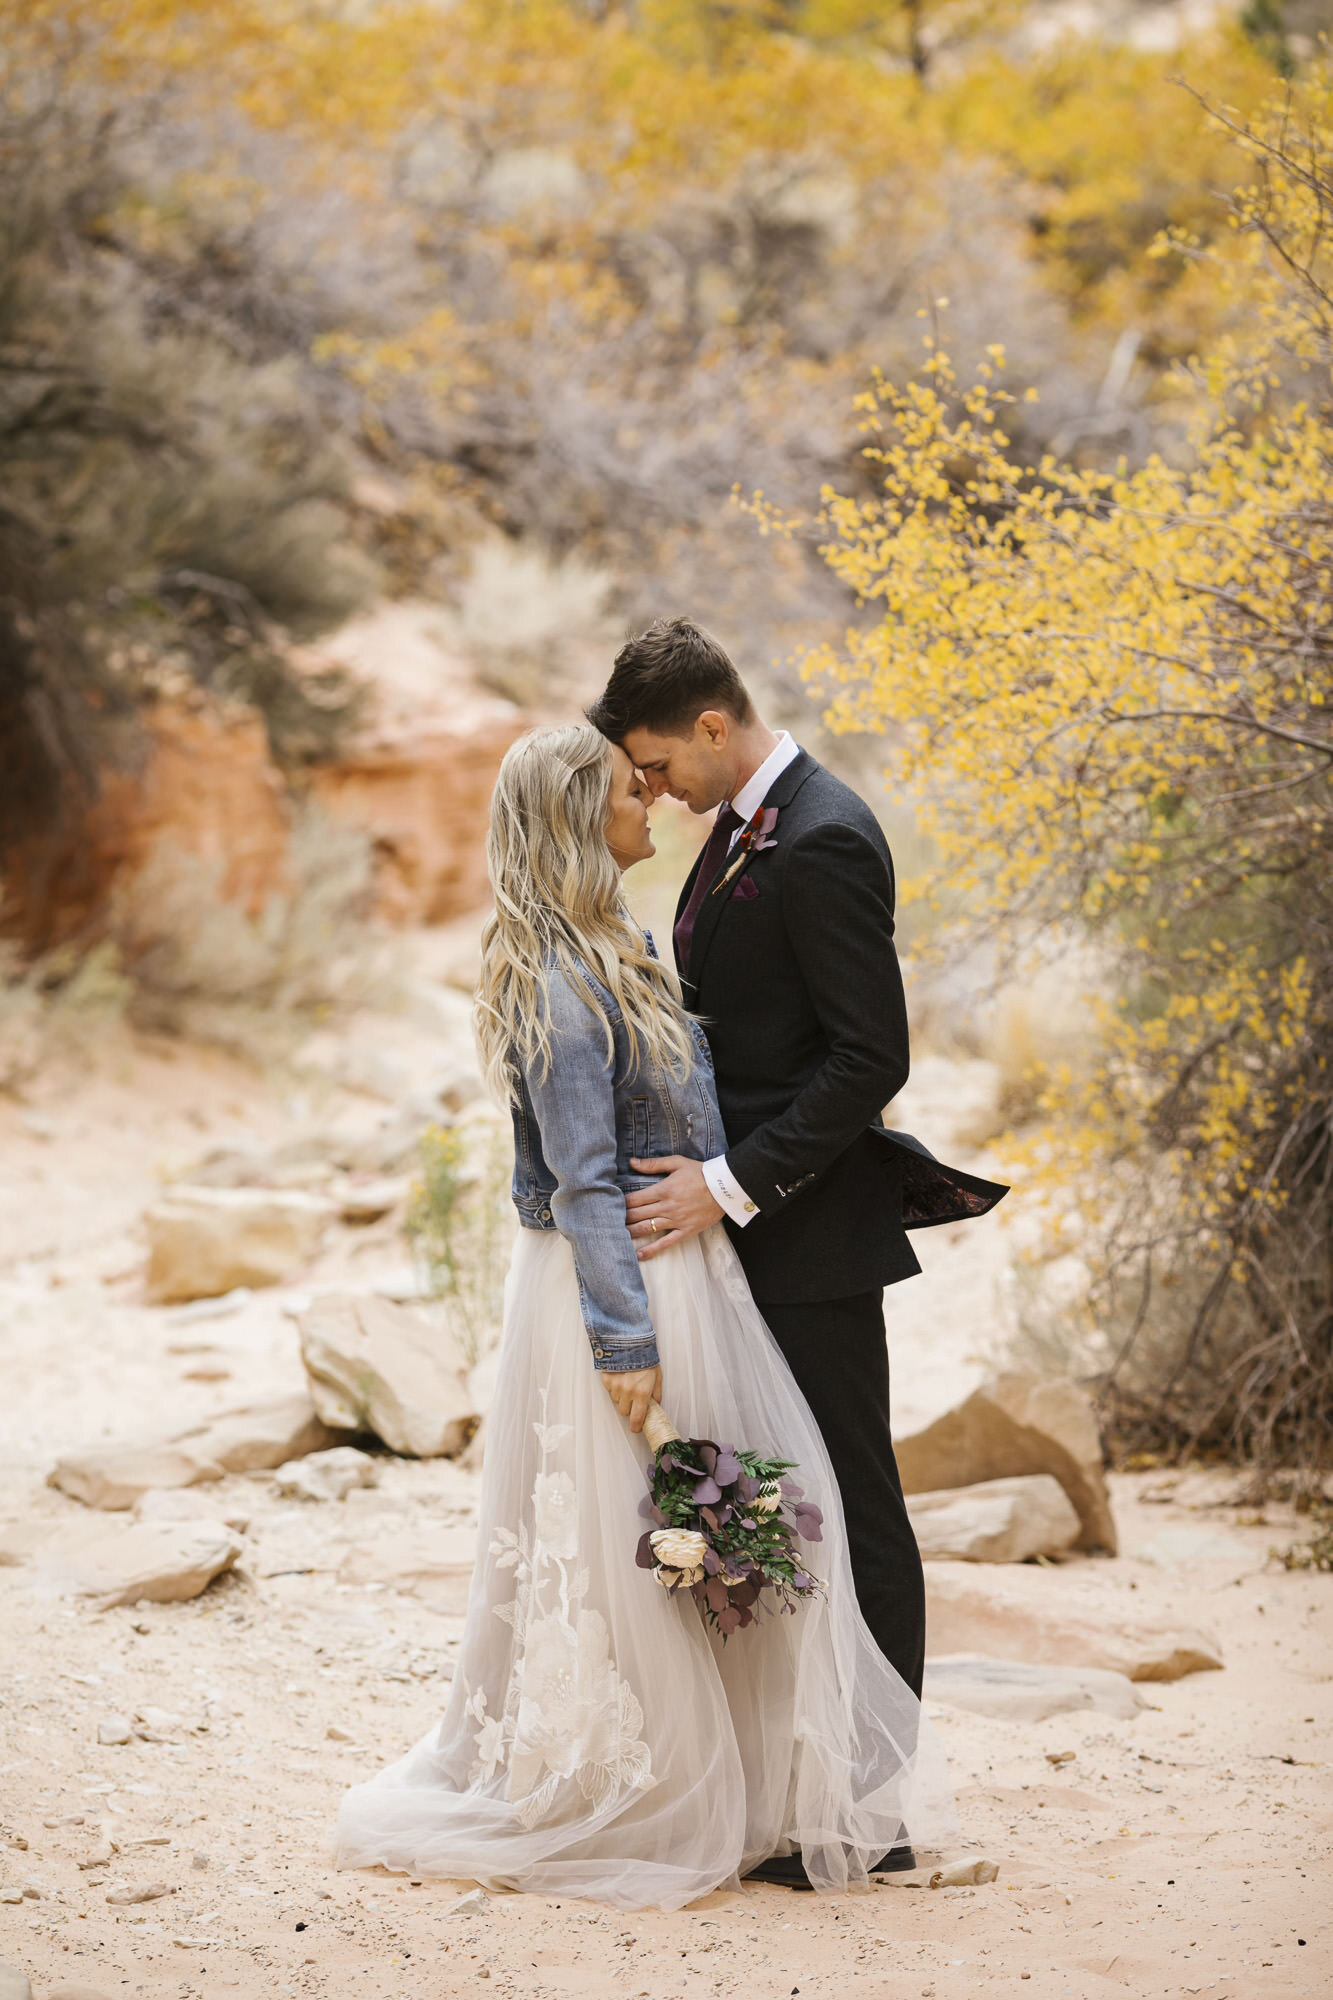 Bride in denim jacket stands with her groom during their day-after wedding portraits in the Utah desert